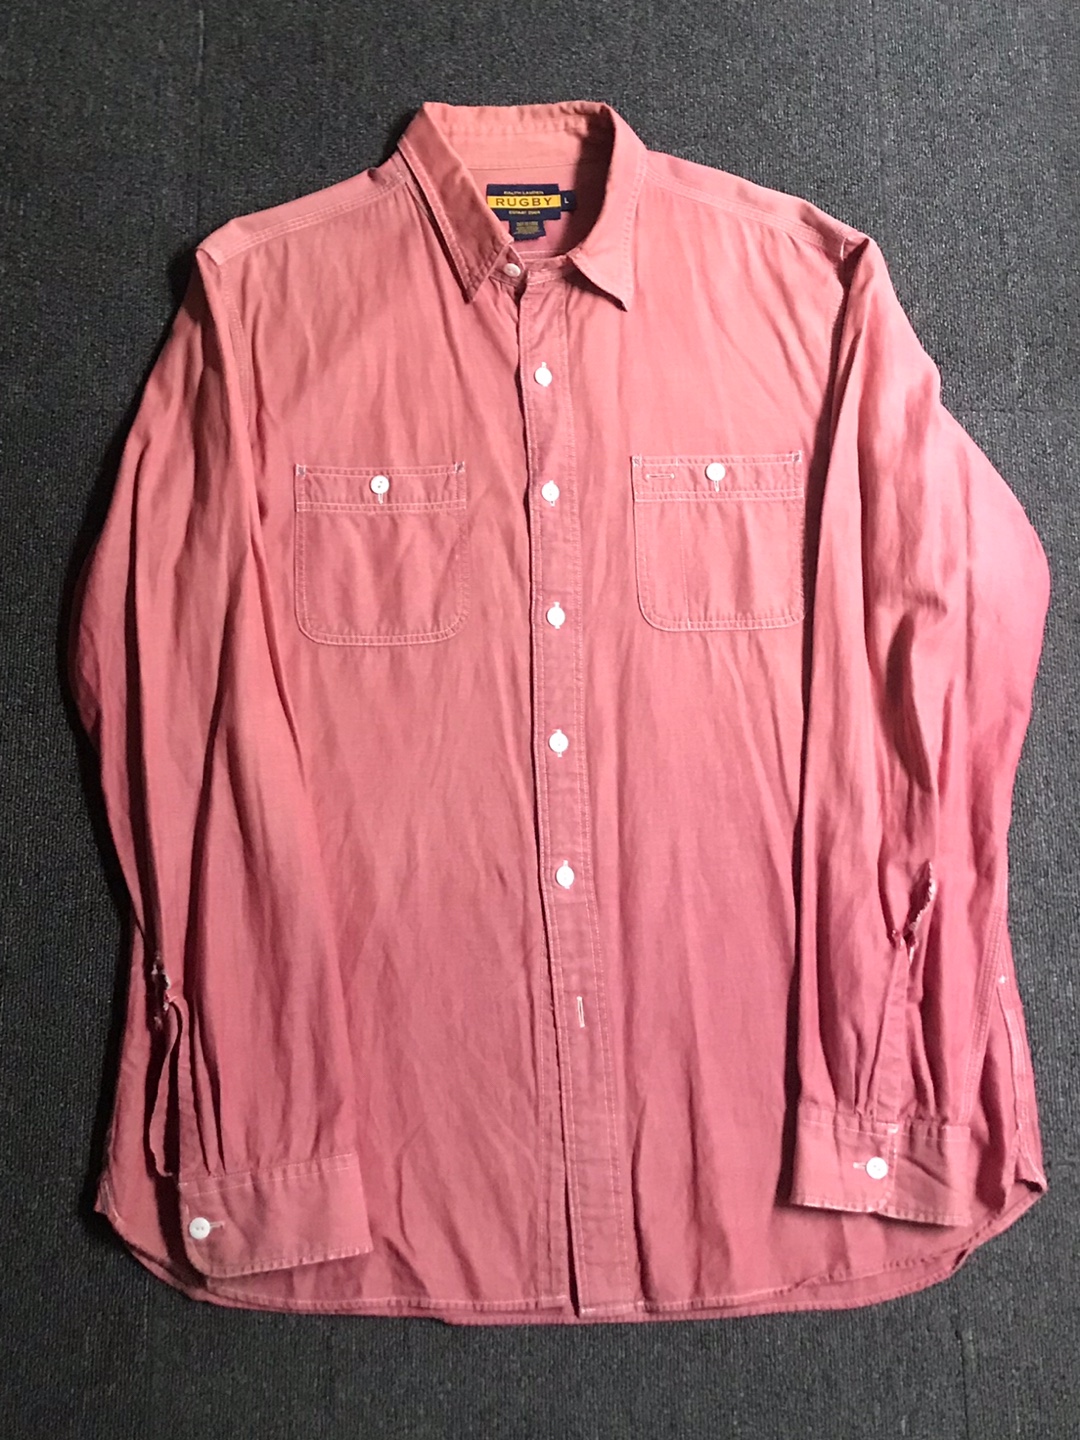 rugby RL distressed chambray work shirt (L size, ~103 추천)